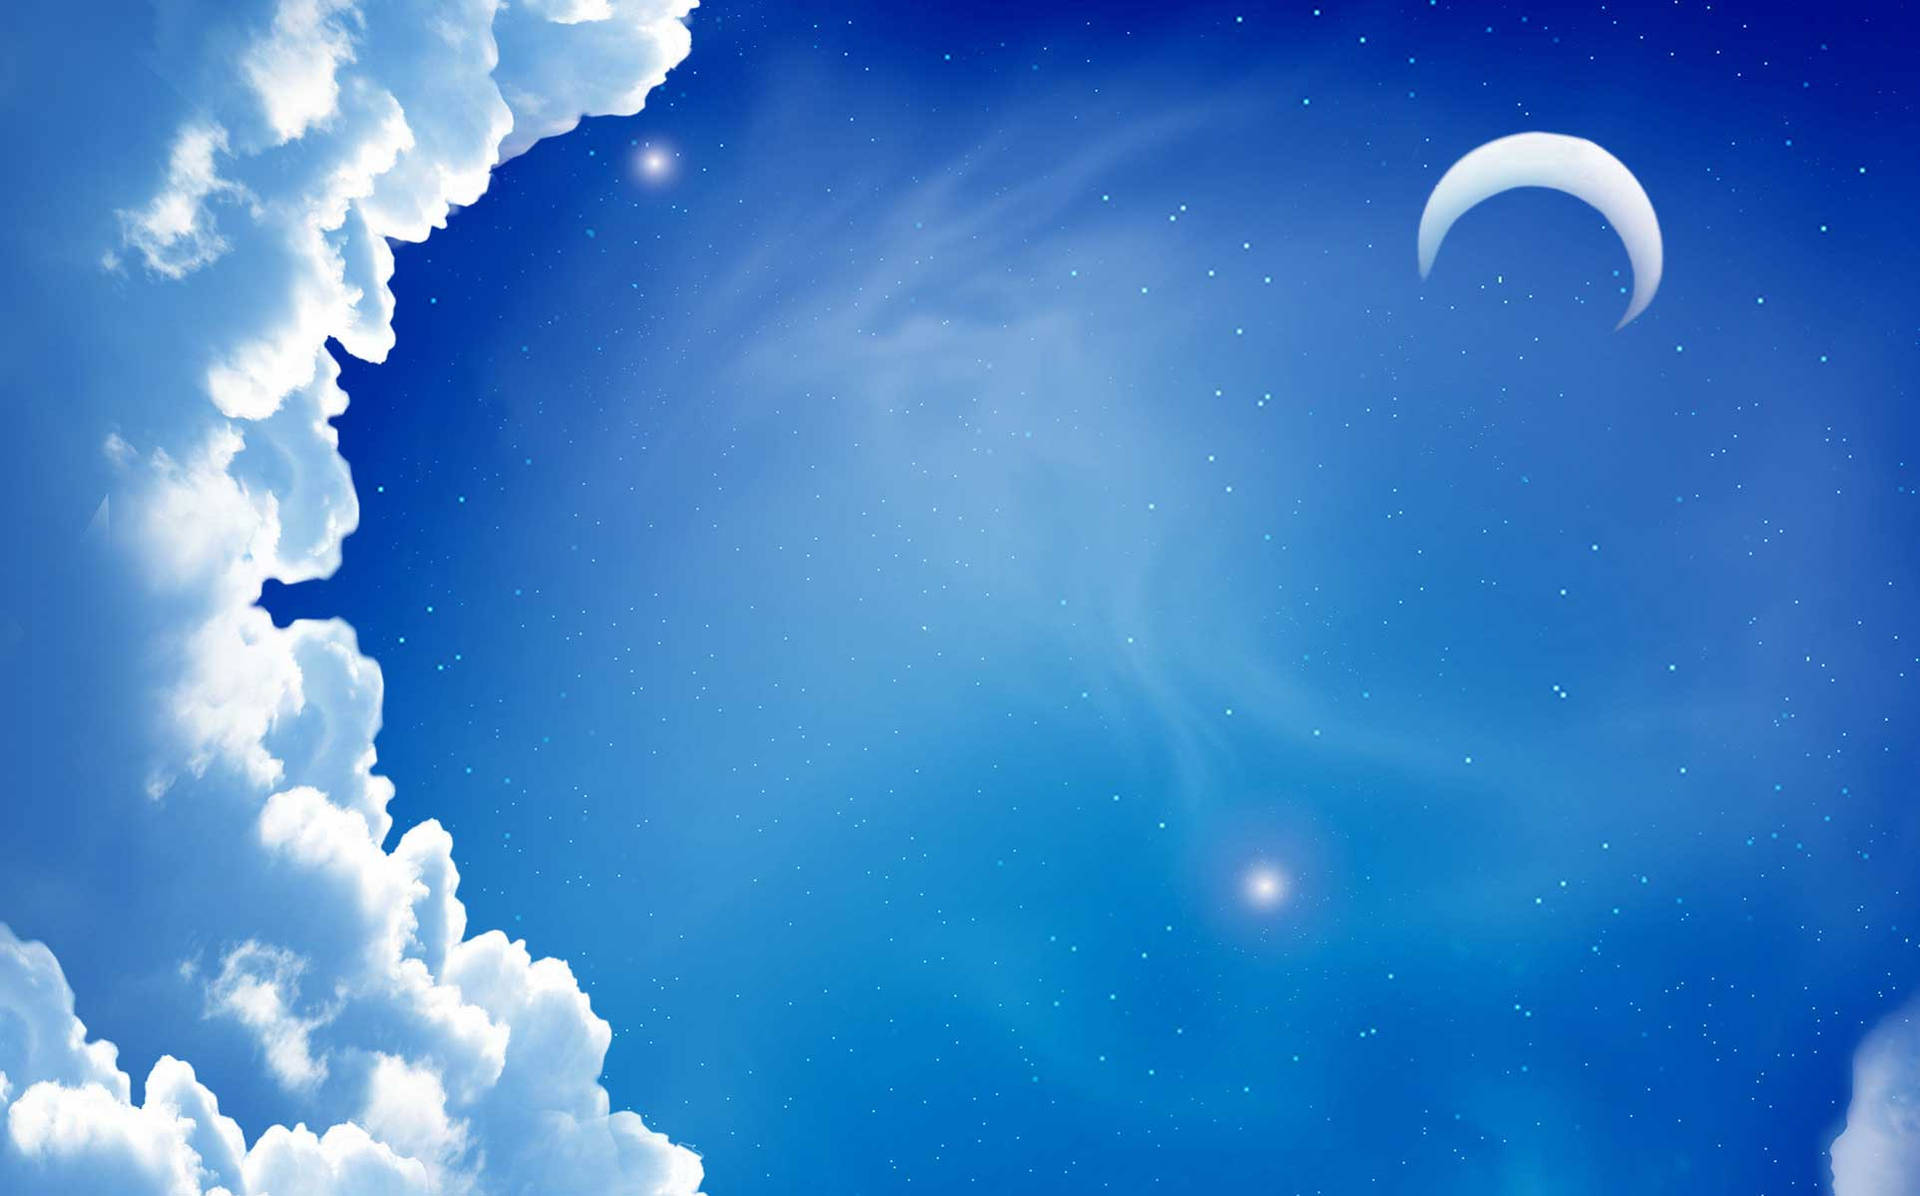 Clouds On Blue Night Sky Background